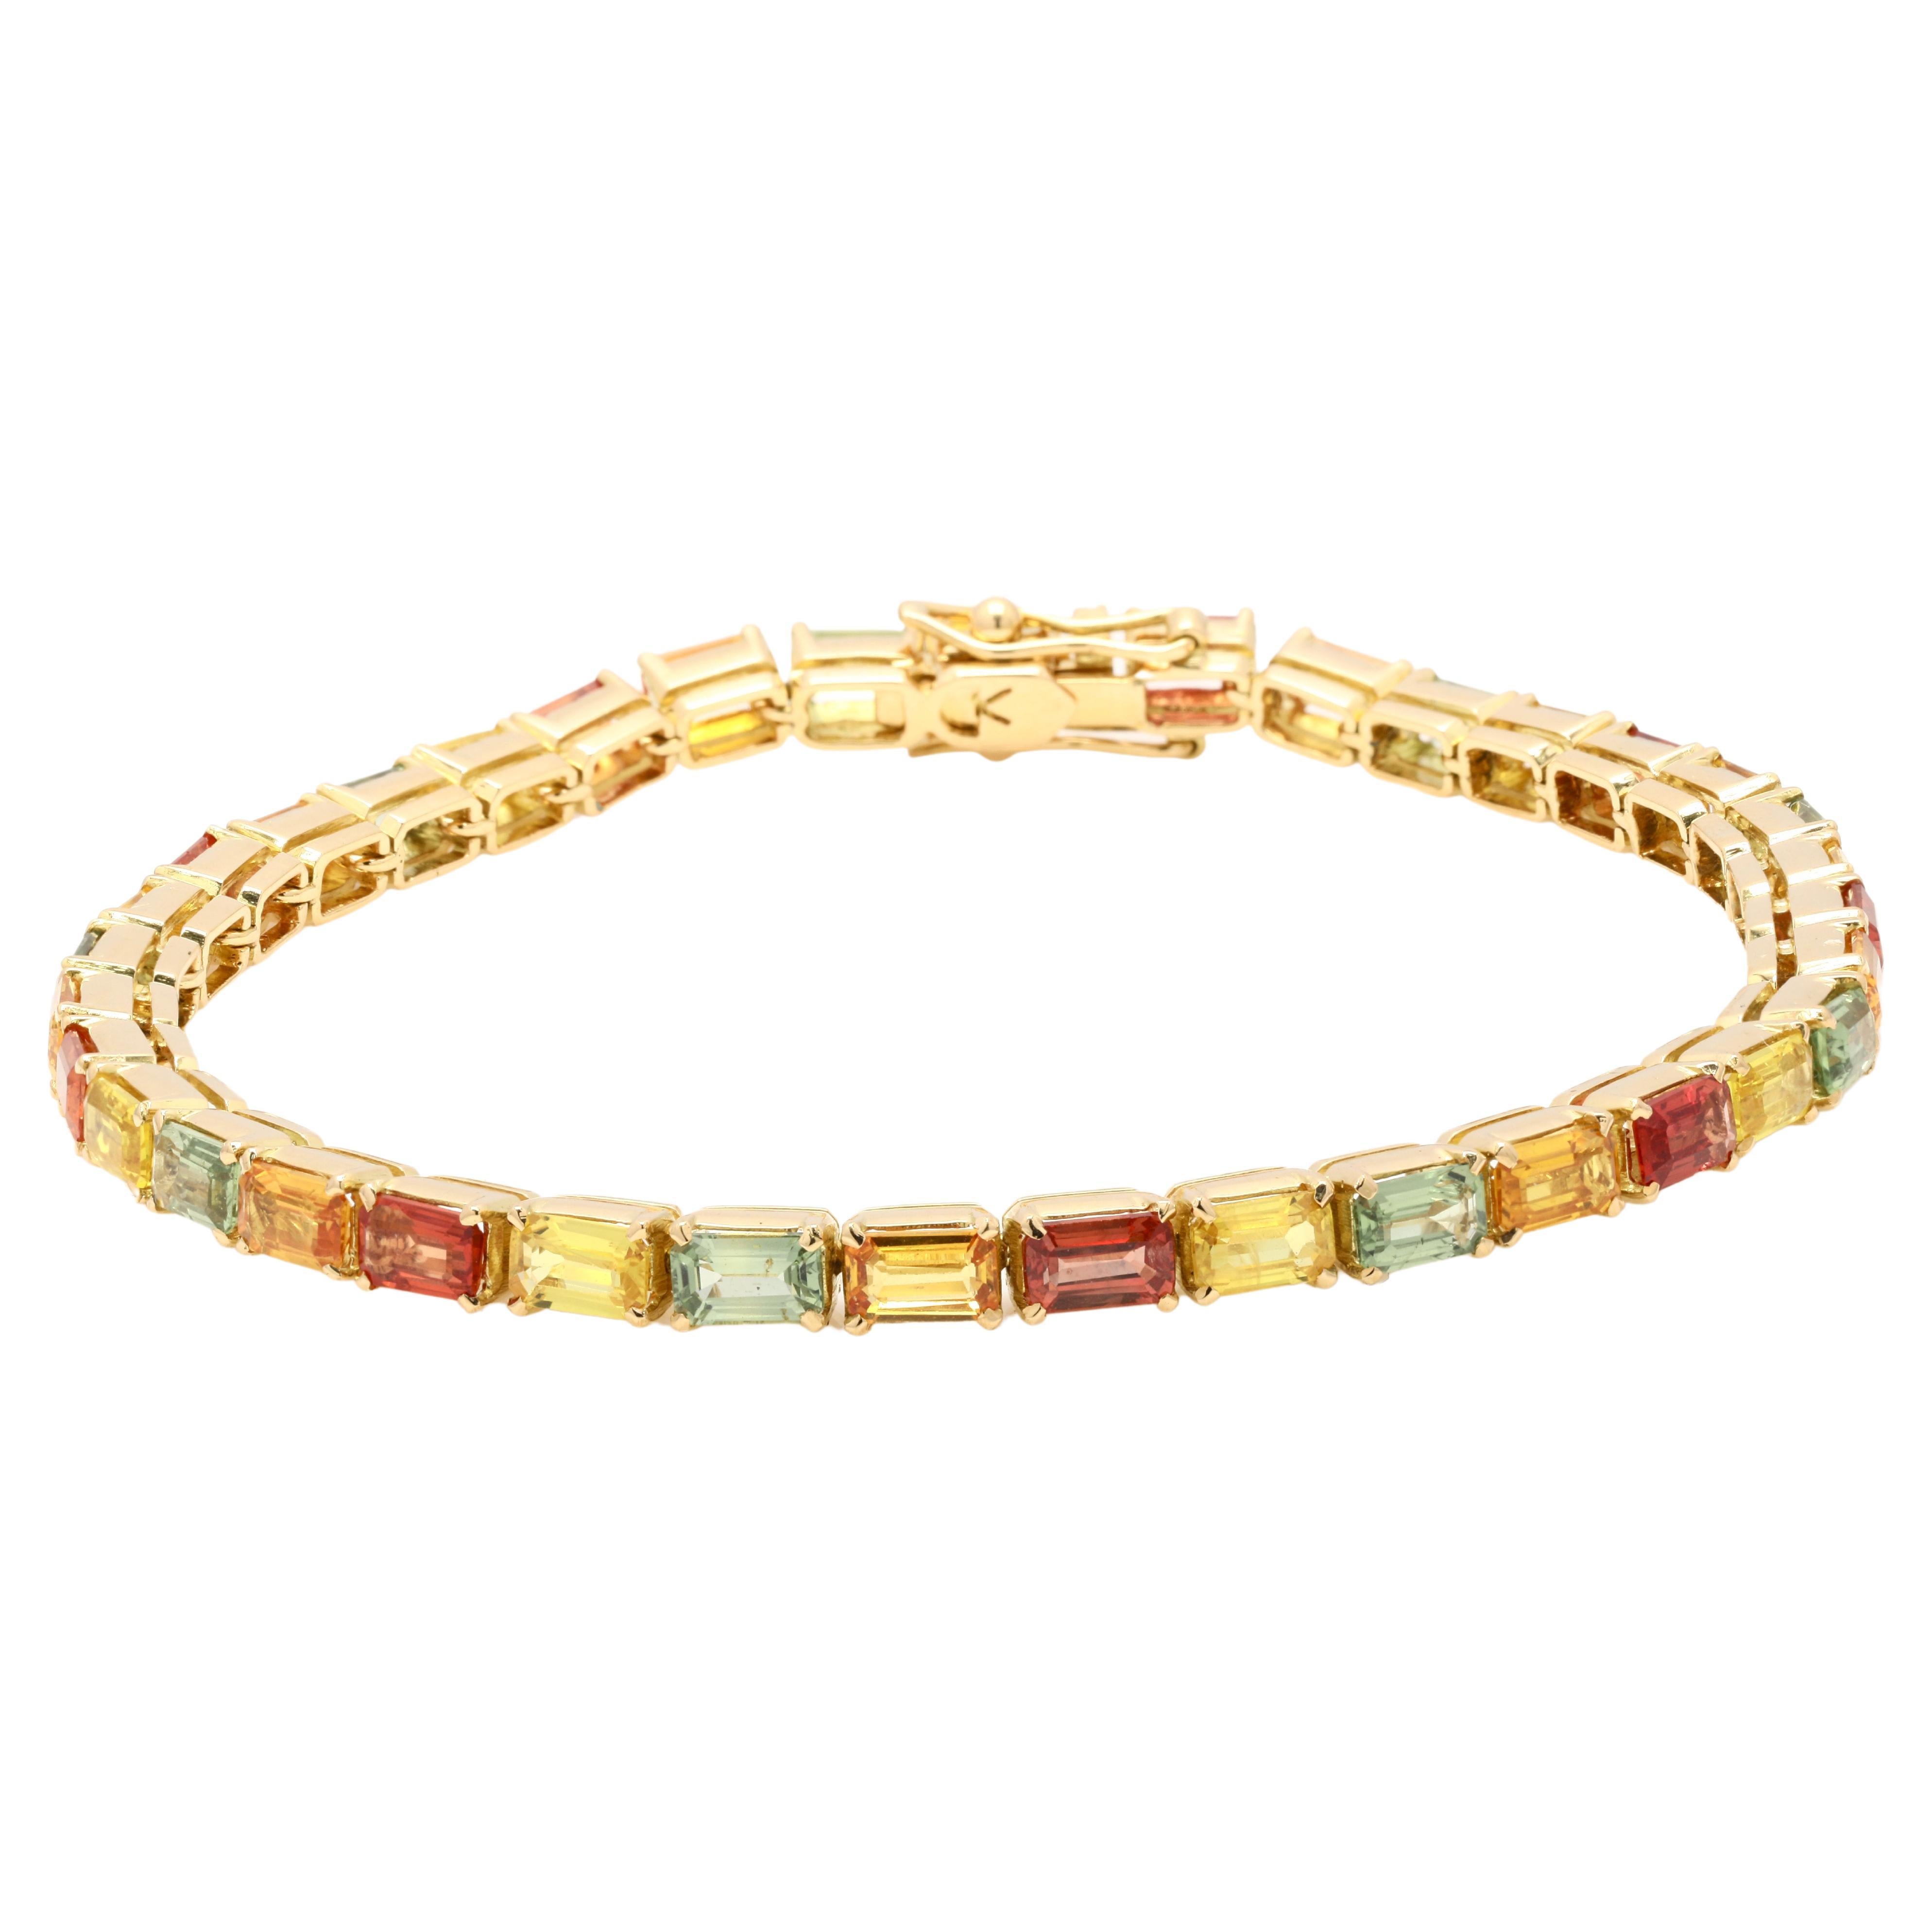 Multi Colored 12.25 ct Sapphire Handcrafted Tennis Bracelet in 18K Yellow Gold